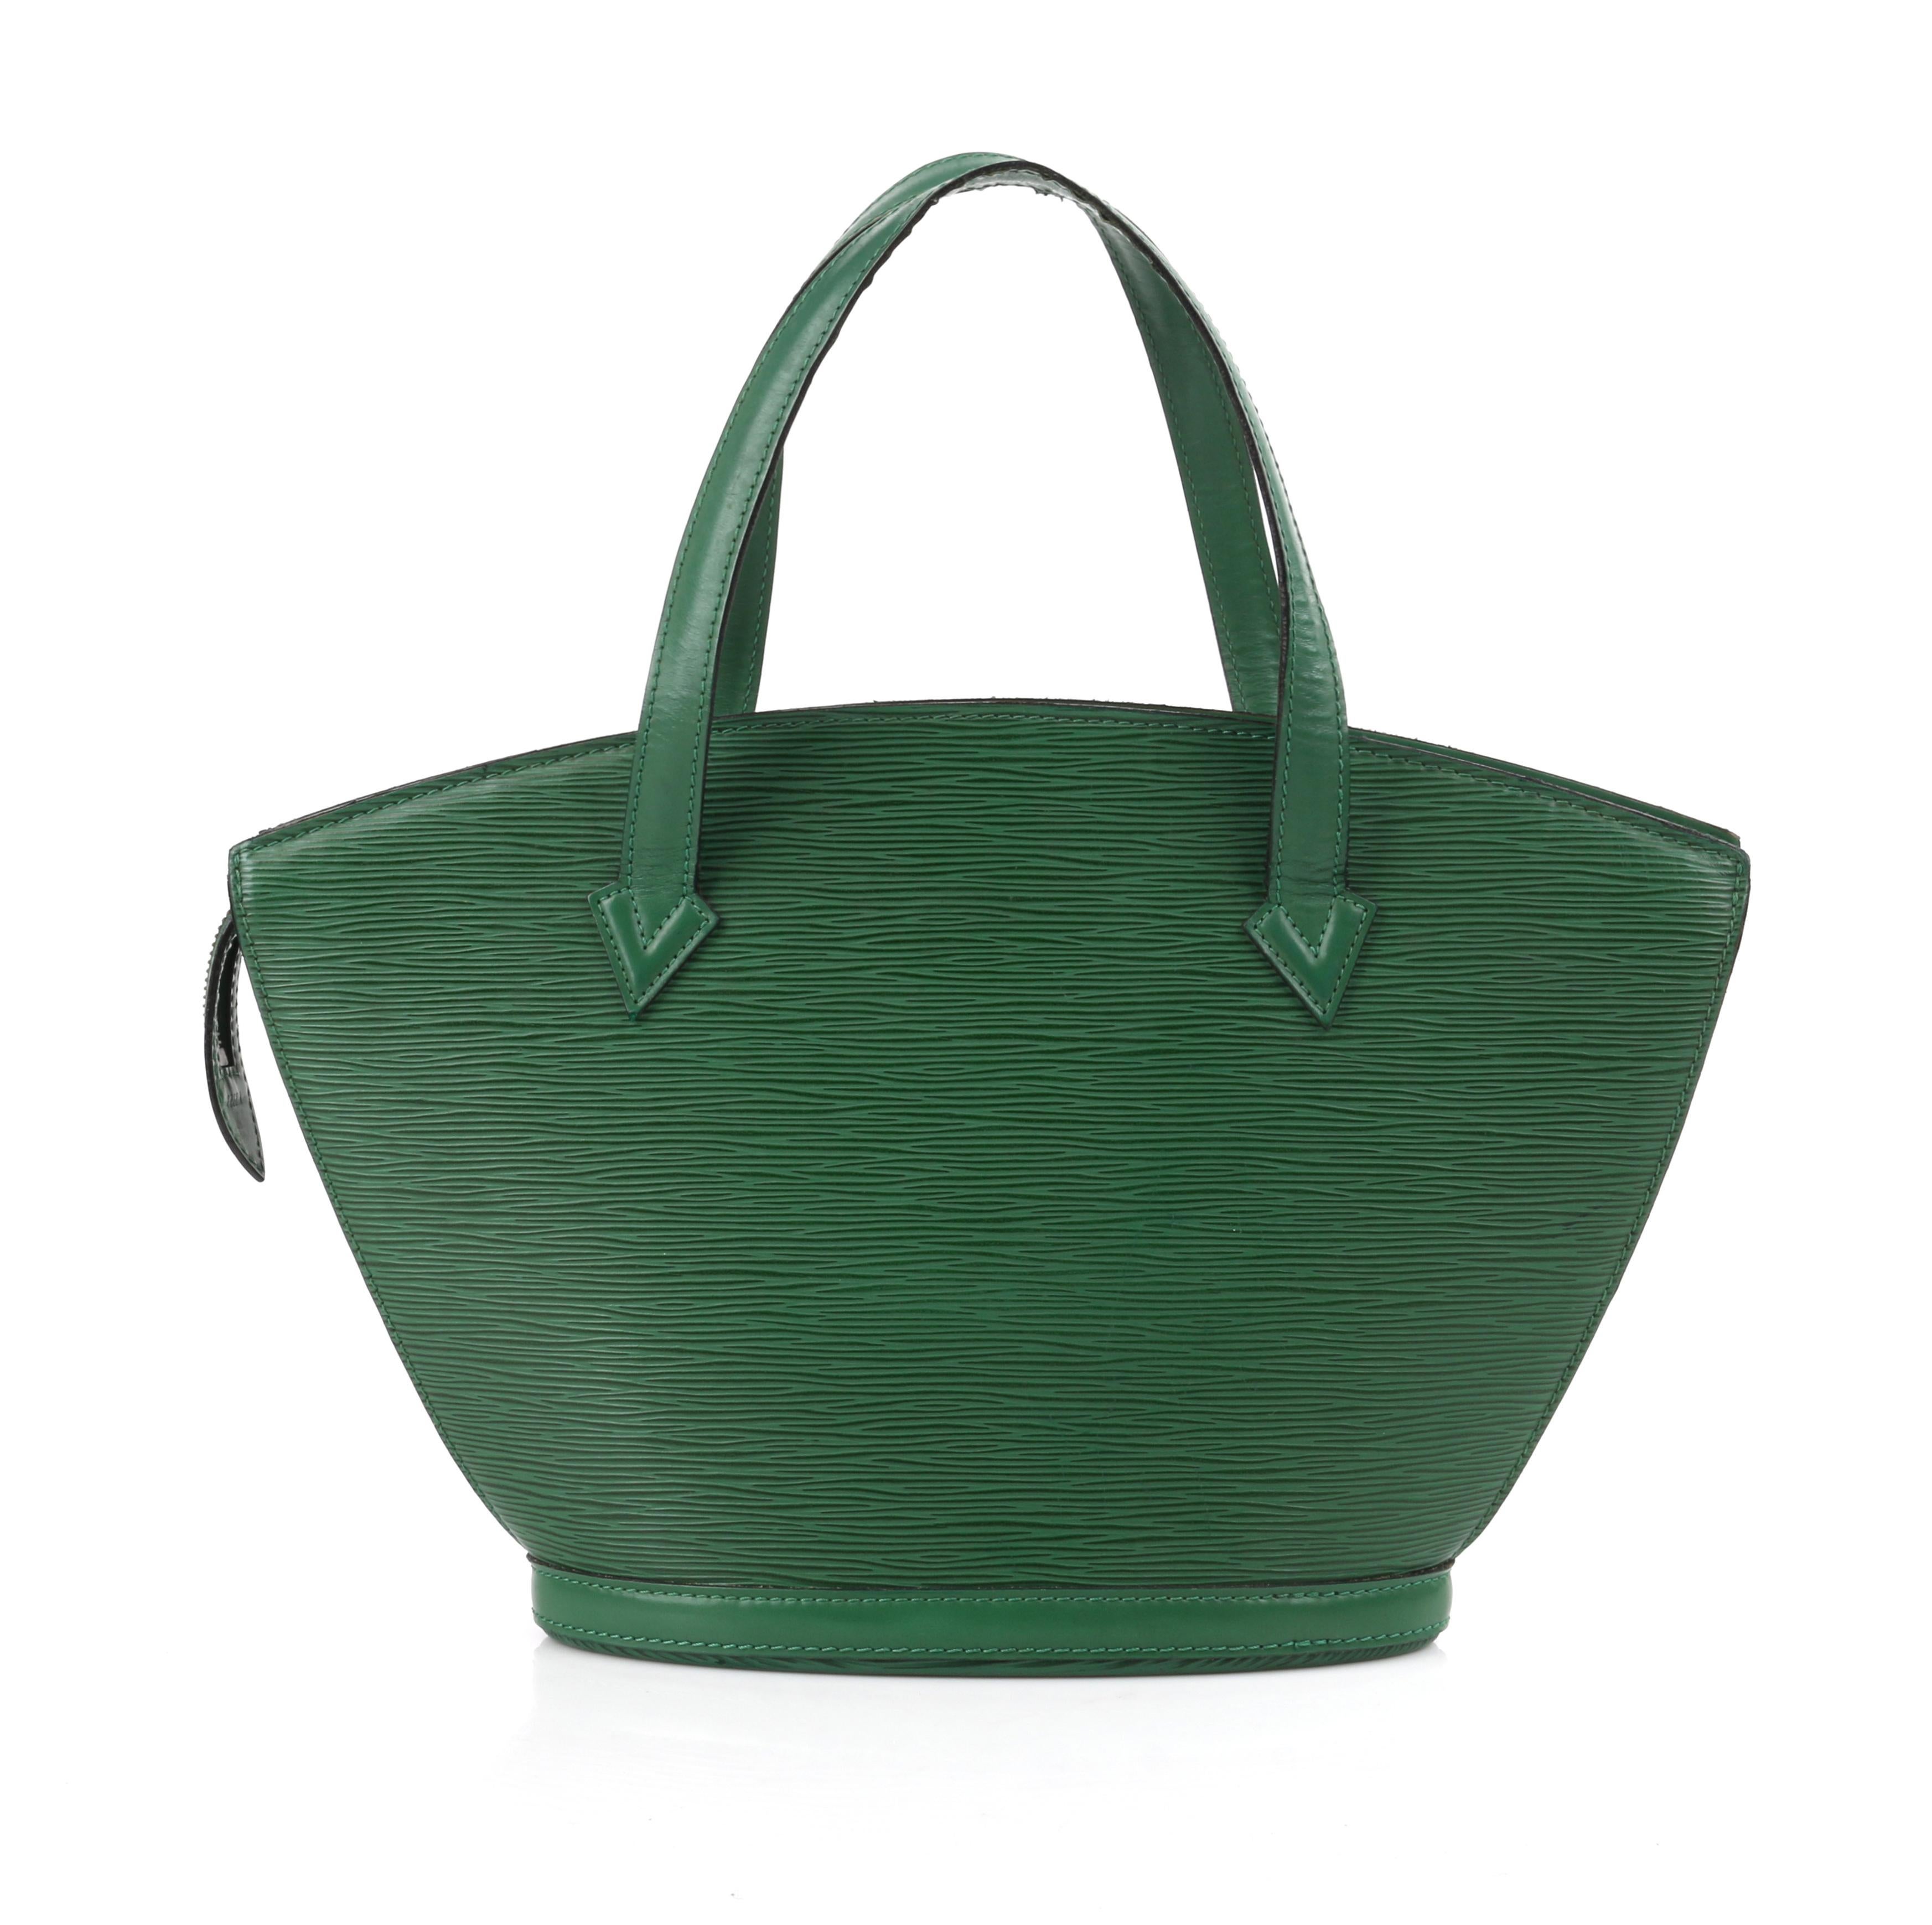 LOUIS VUITTON c.1993  “St. Jacques” Borneo Emerald Green Epi Leather Shoulder Bag Handbag 
 
Circa: 1993
Label(s): Louis Vuitton 
Style: Shoulder bag, handbag, purse
Color(s): Green 
Lined: Yes 
Unmarked Fabric Content: Epi Leather (exterior)